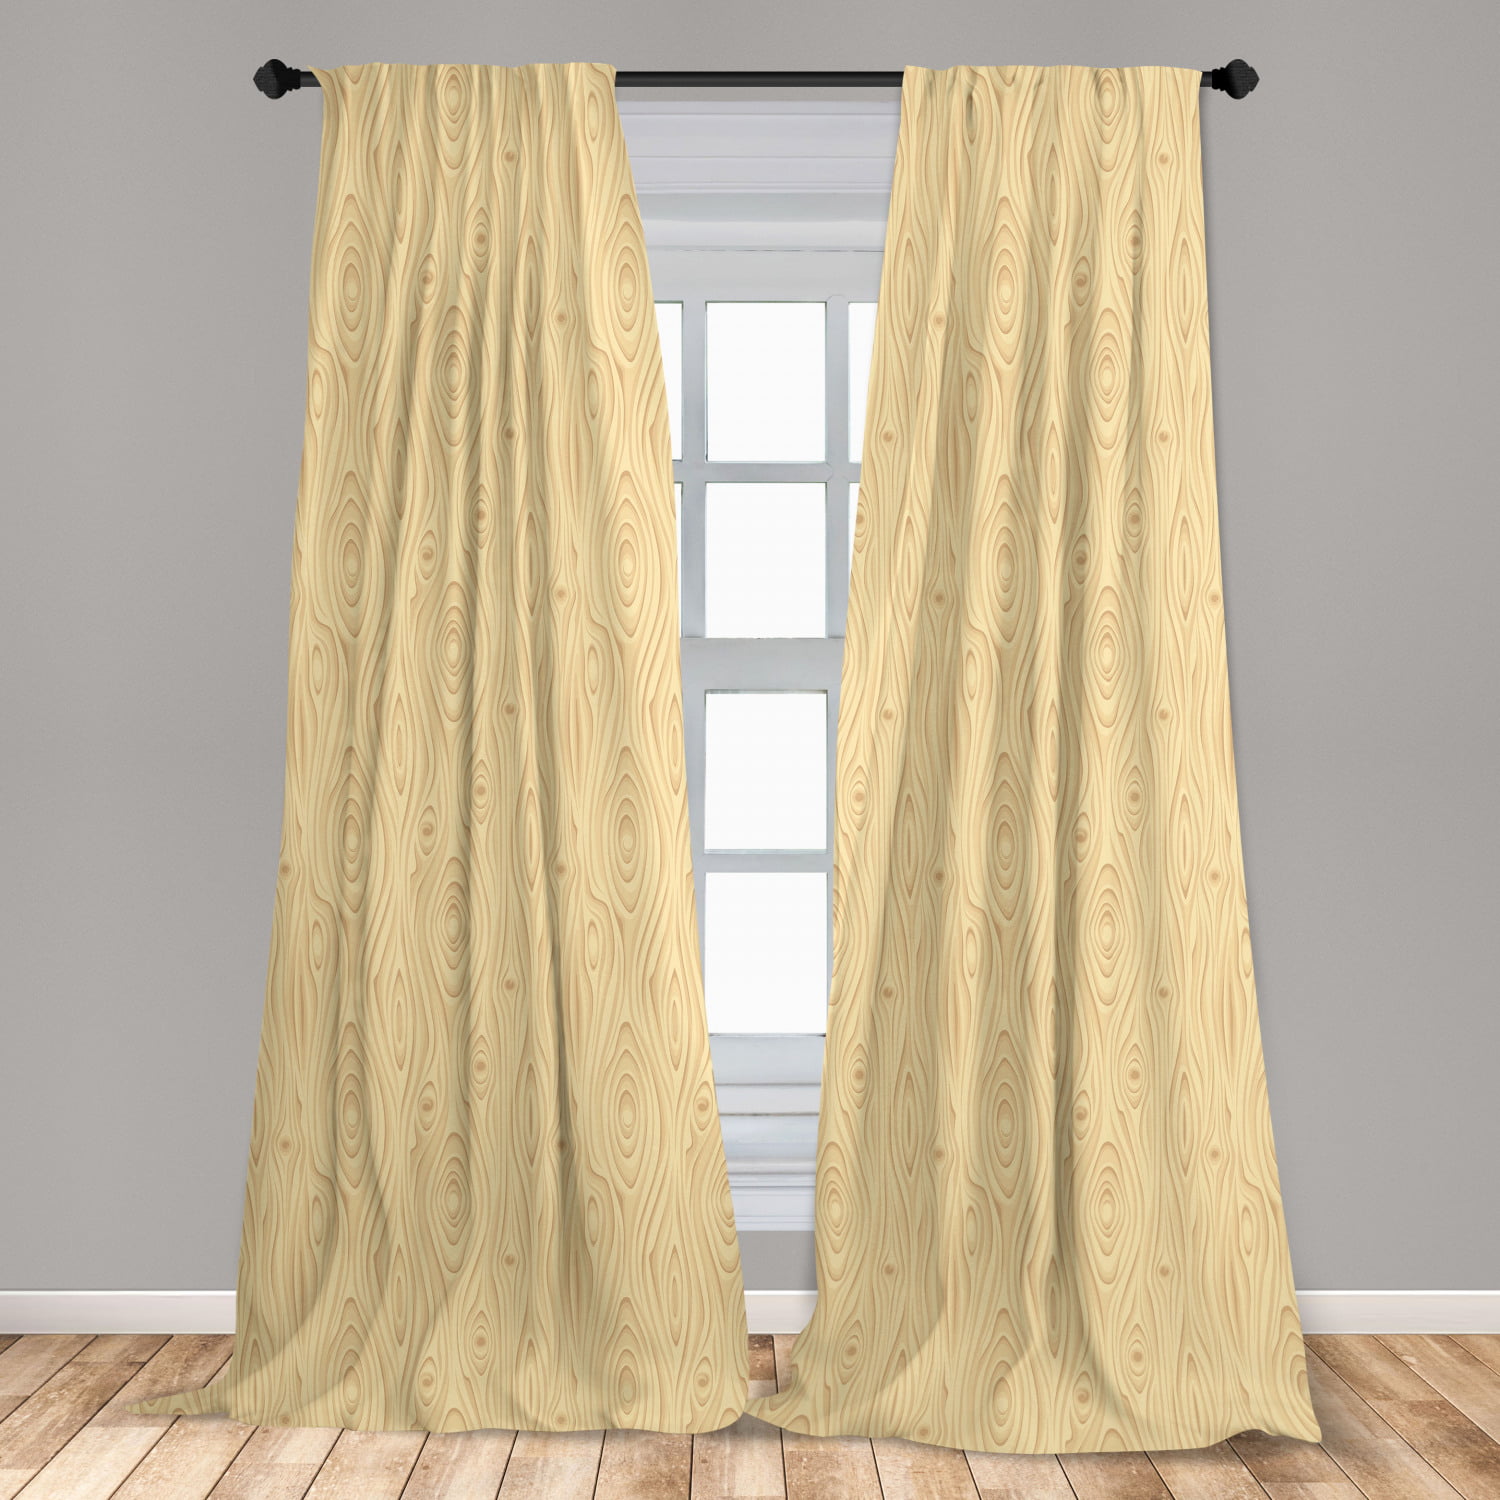 Boho Curtains Map on Wooden Rustic Plank Window Drapes 2 Panel Set 108x63 Inches 